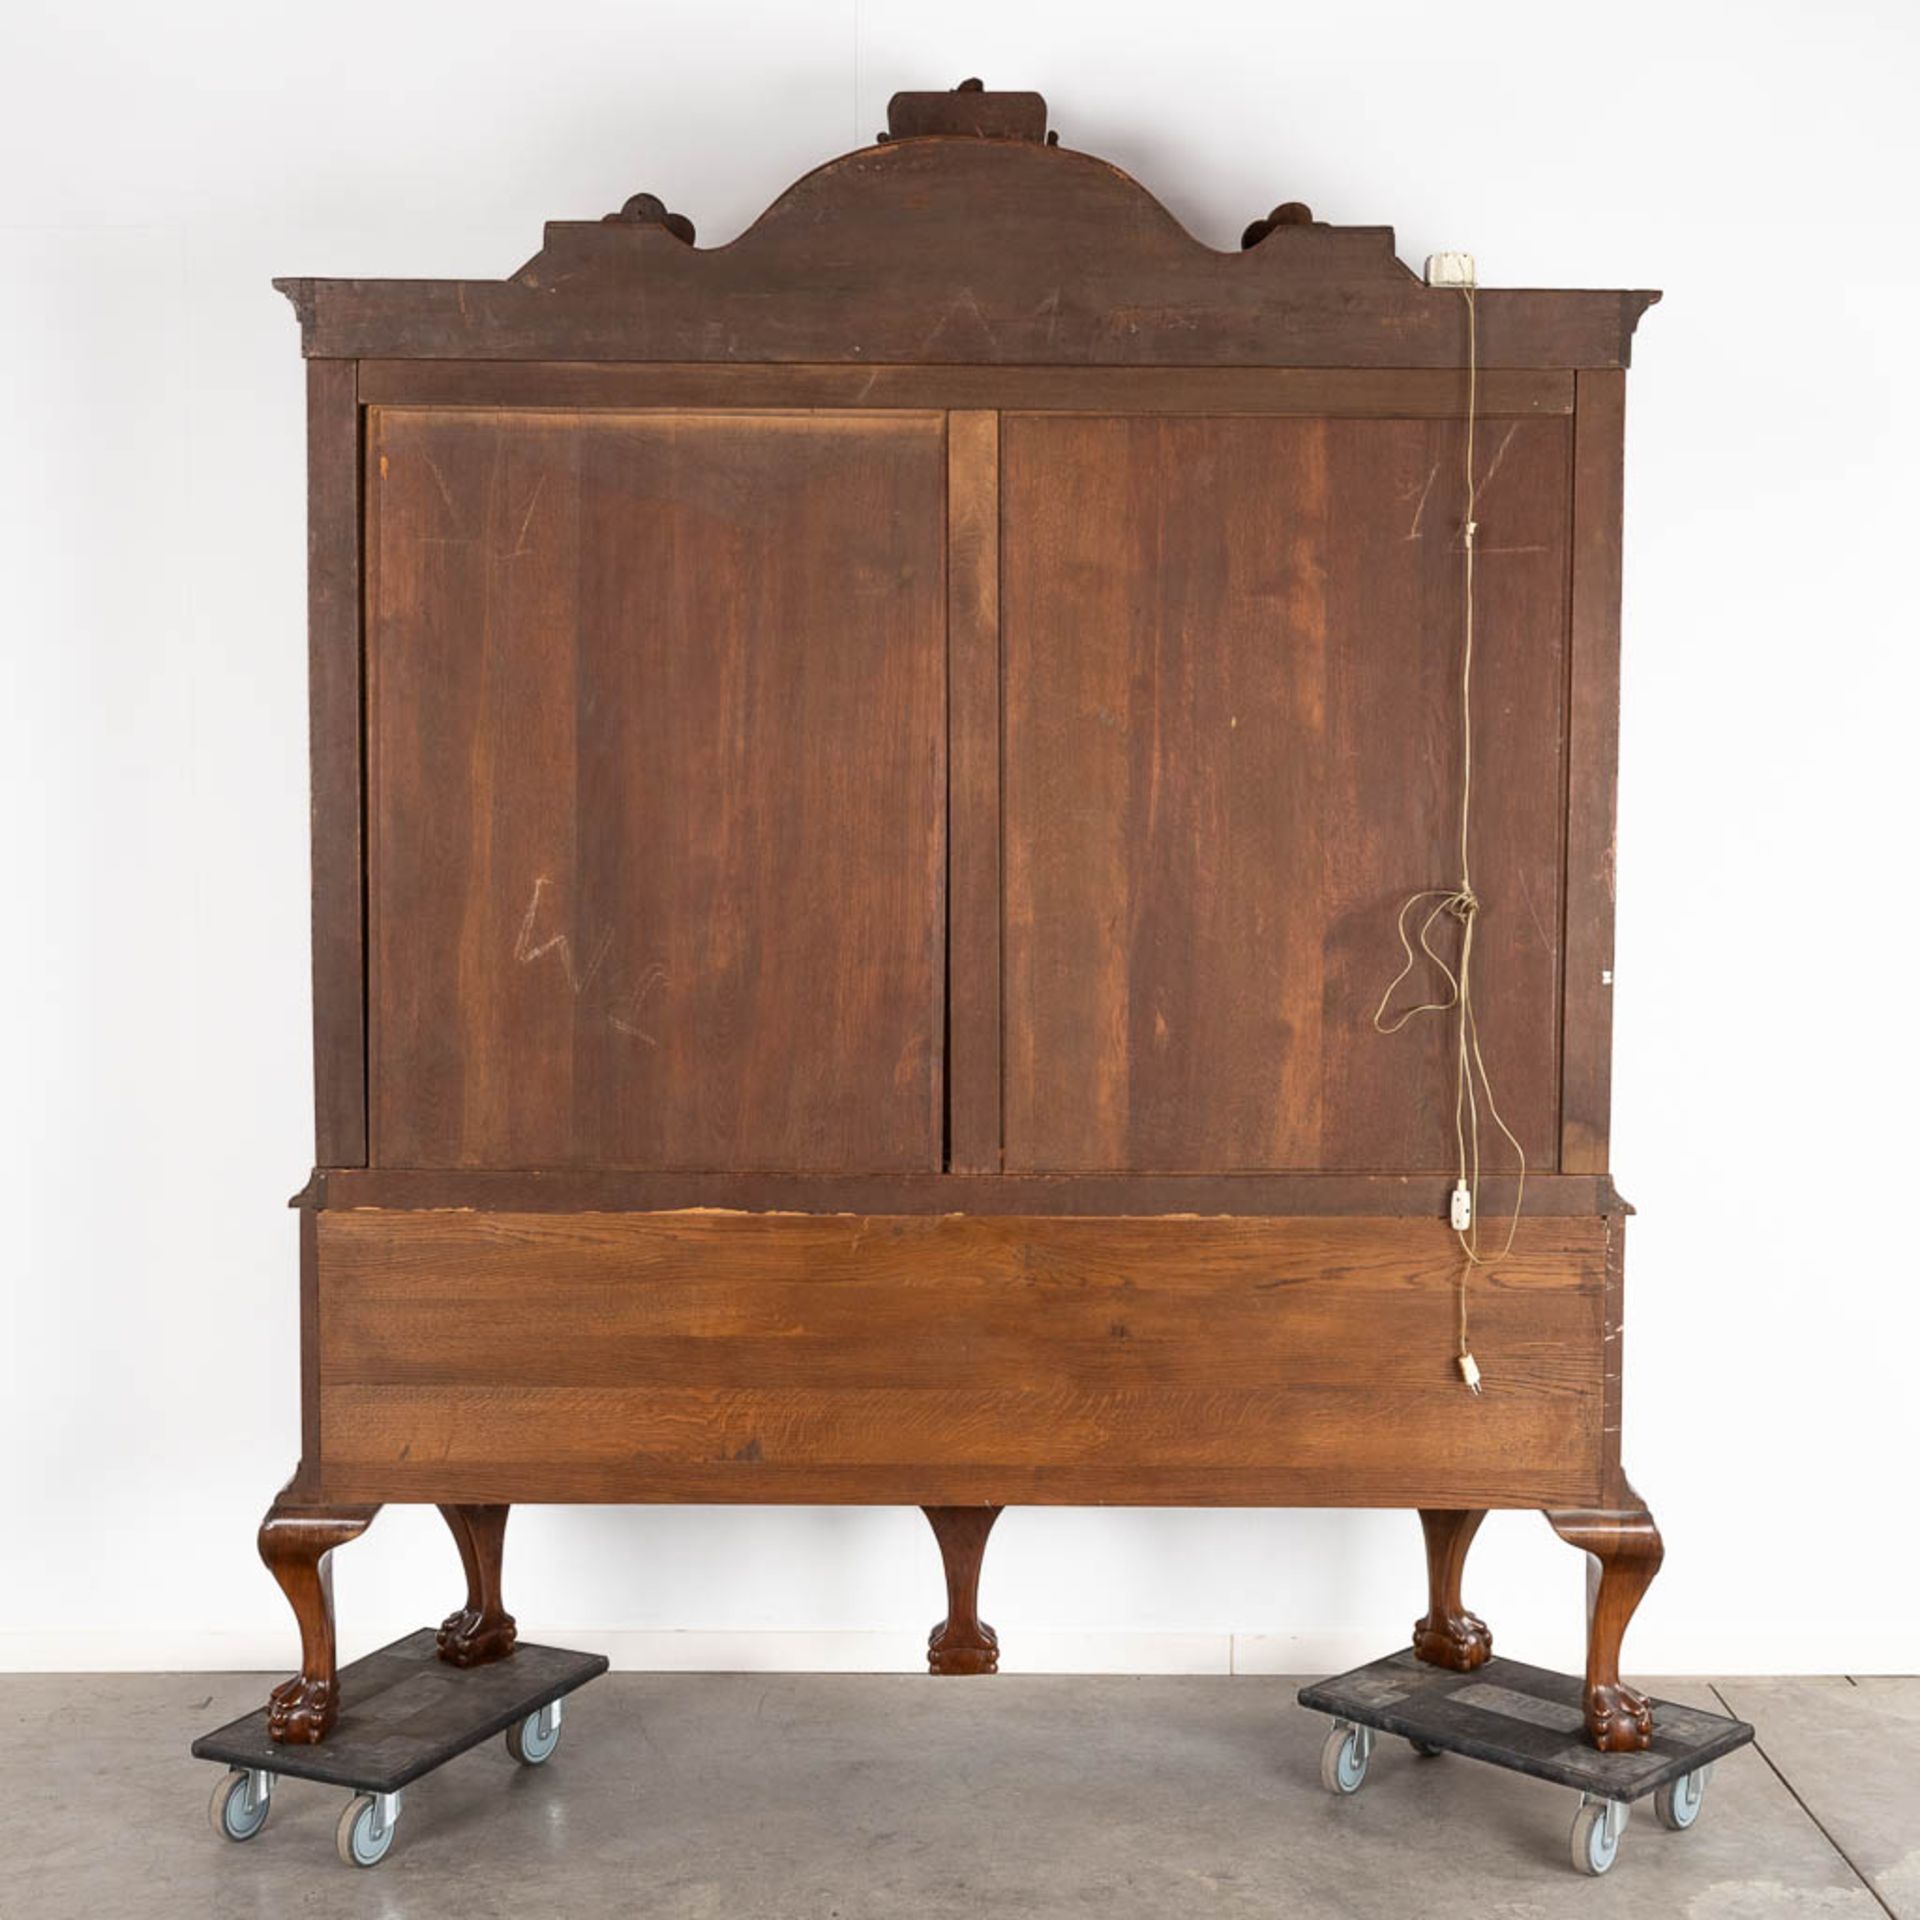 A large display cabinet, England, Chippendale style. 19th C. (D:53 x W:208 x H:252 cm) - Image 7 of 20